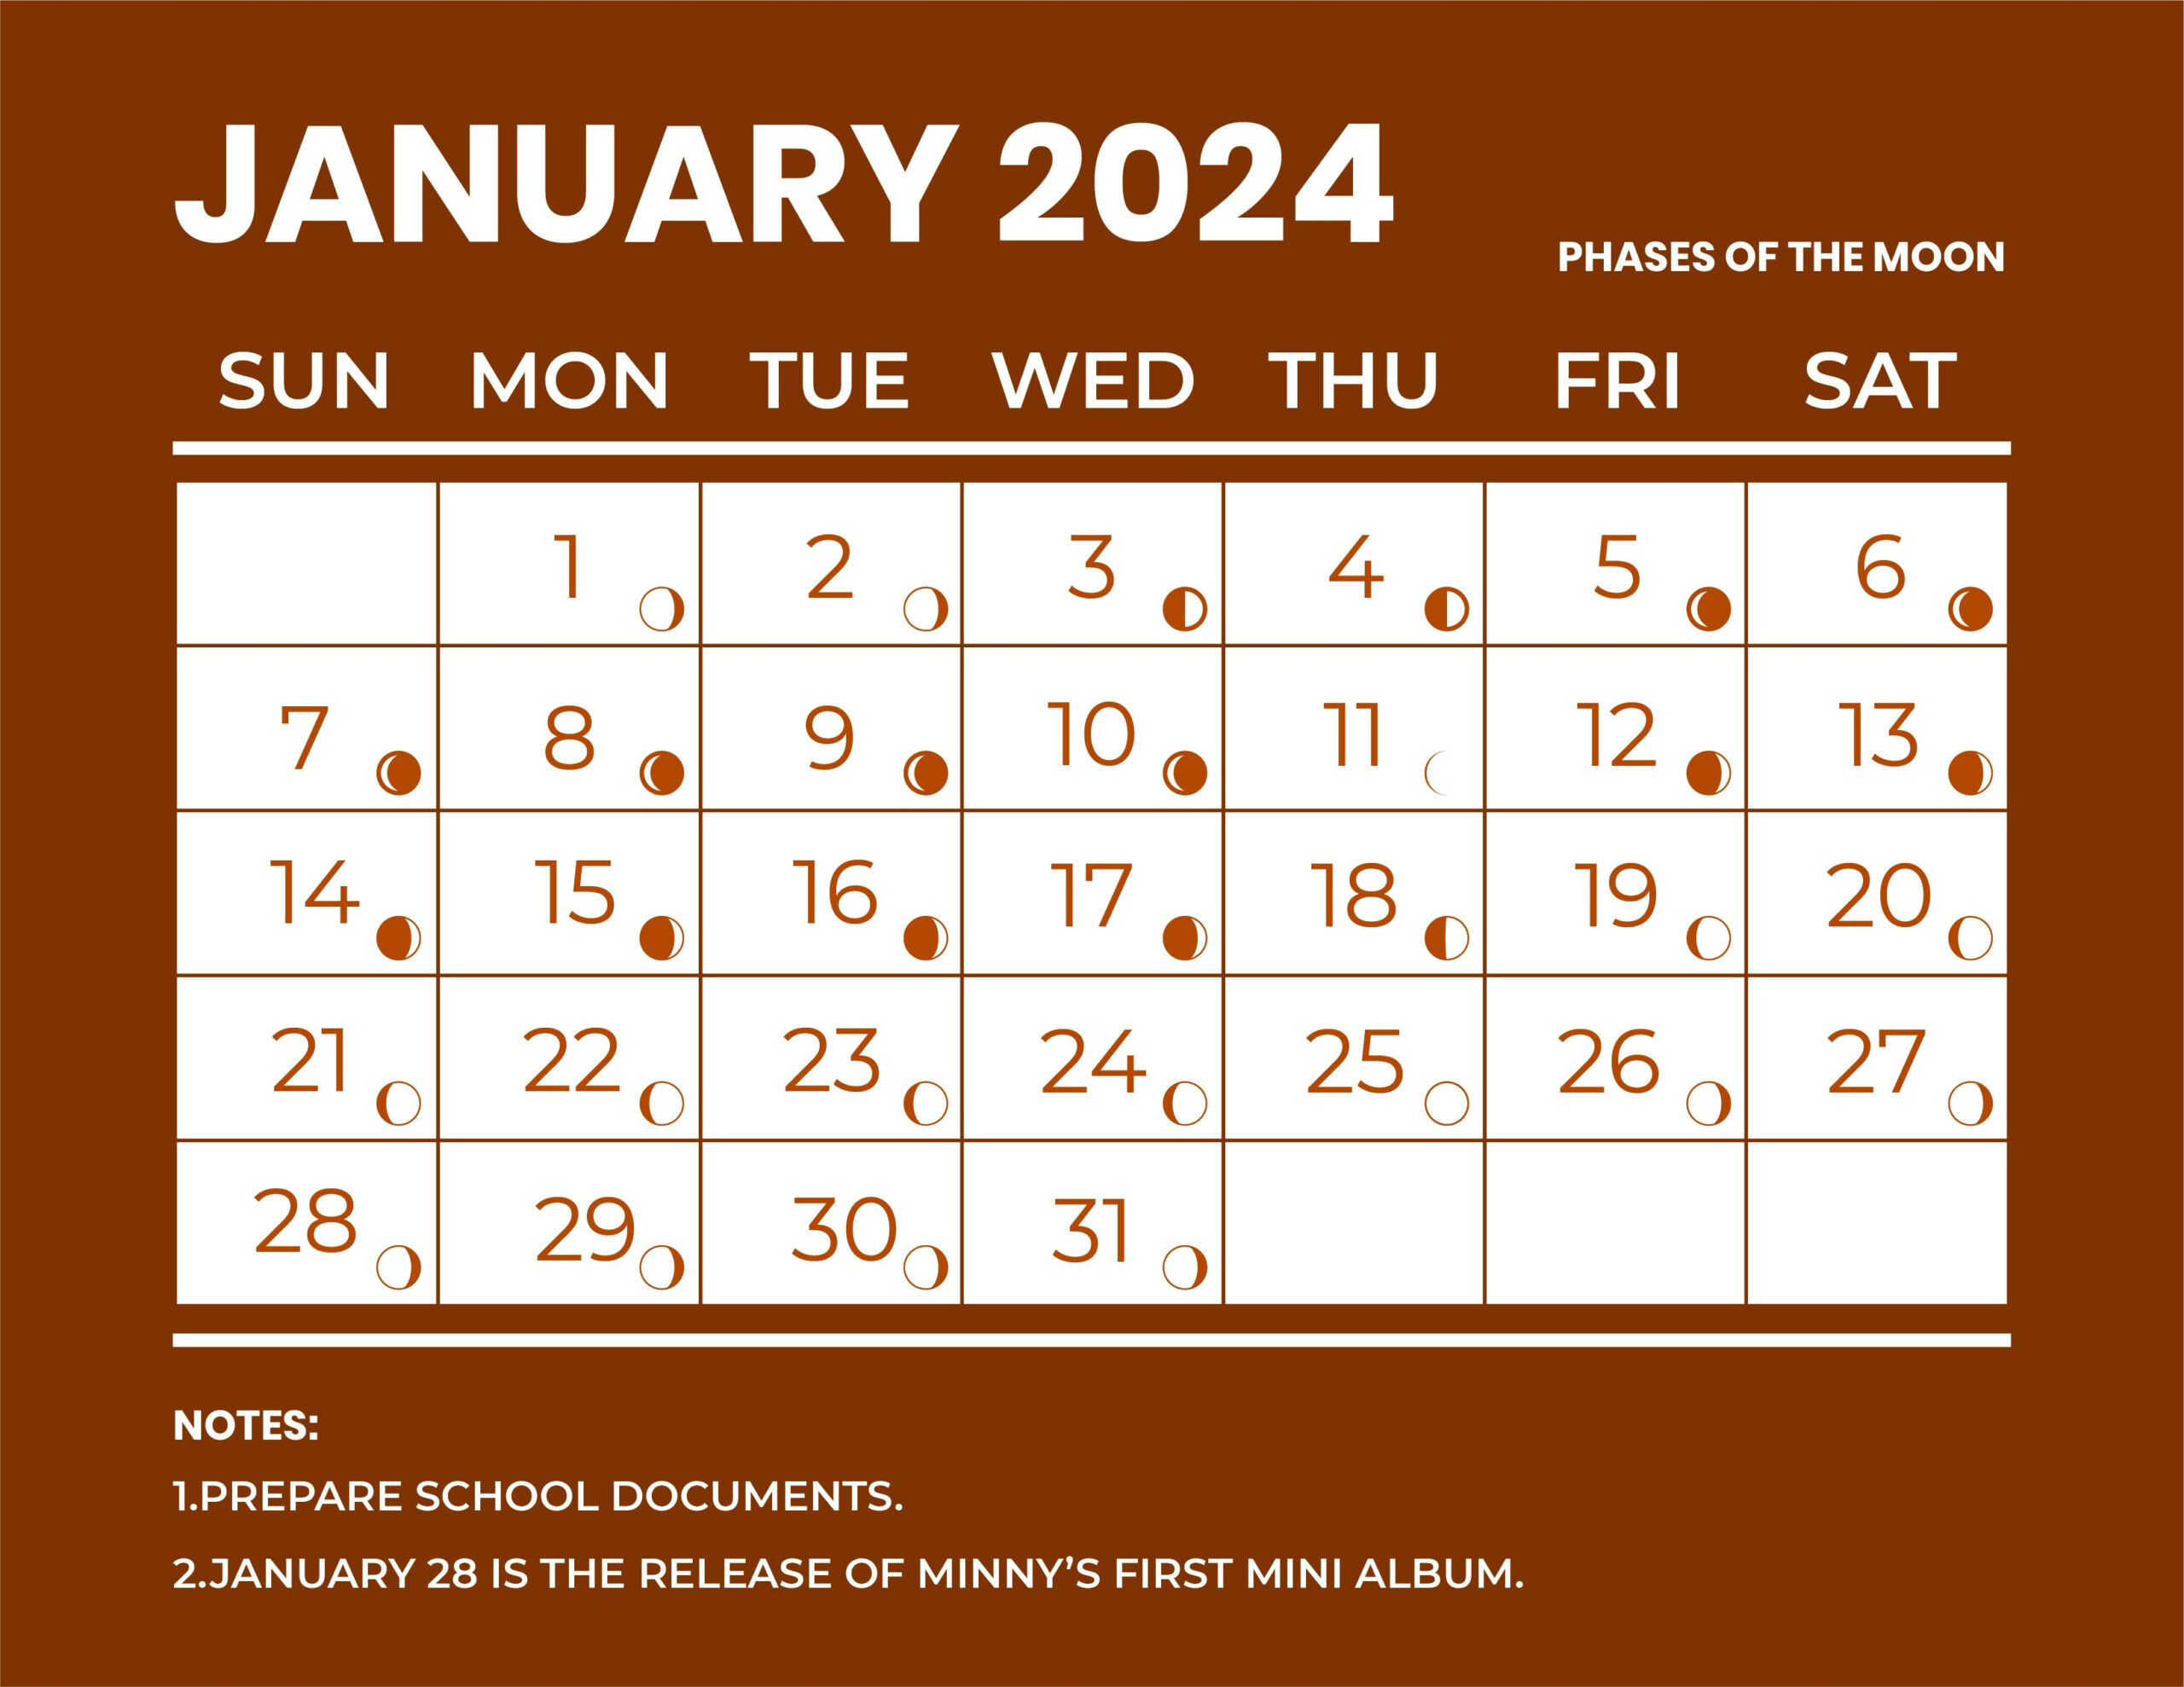 January 2024 Calendar With Moon Phases - Word, Illustrator, Eps for Printable Calendar With Moon Phases 2024